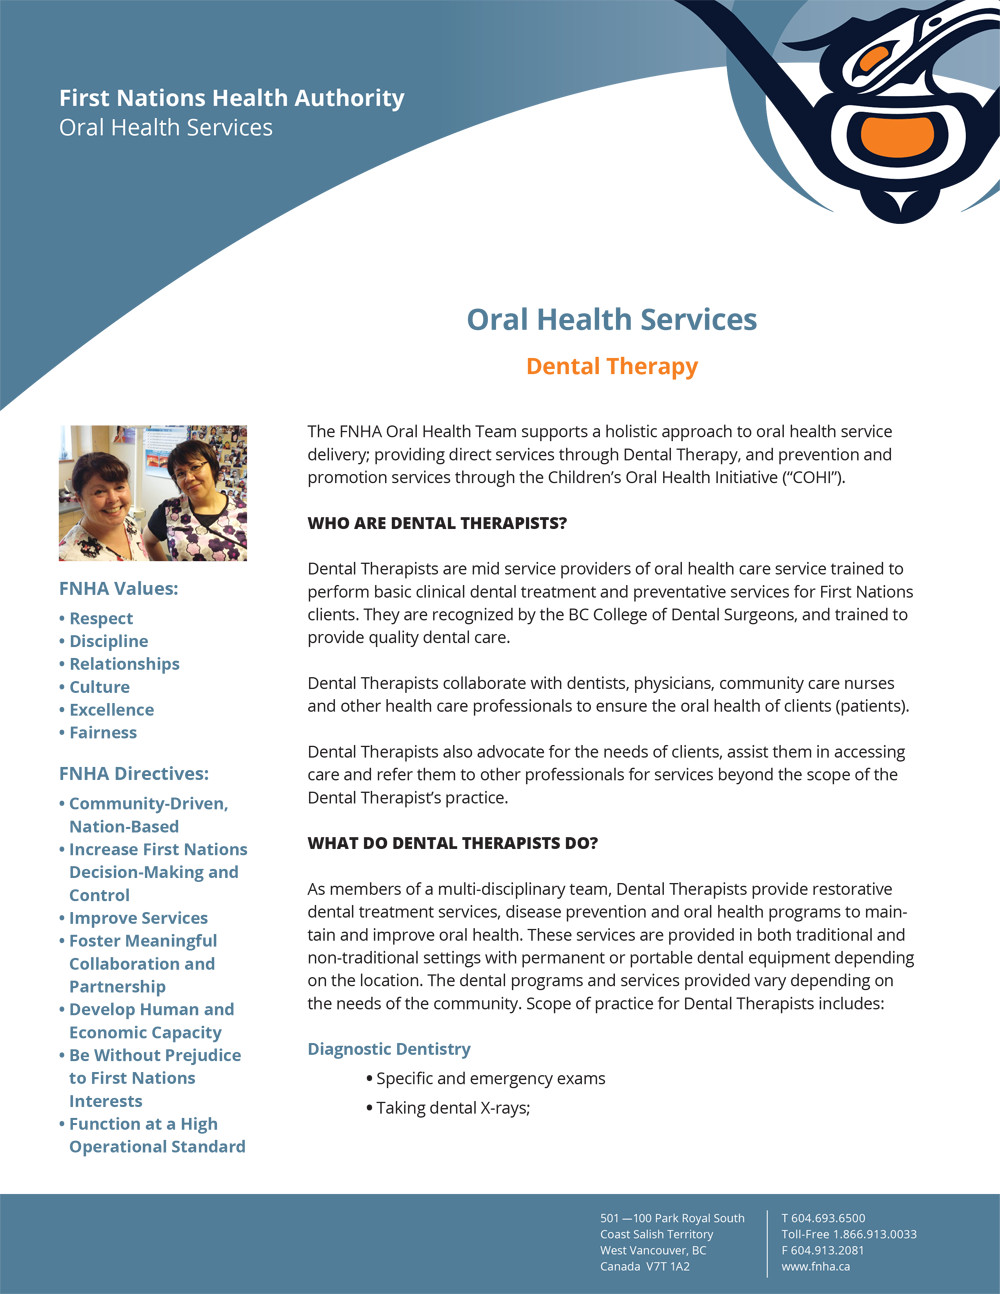 FNHA-Oral-Health-Services-Dental-Therapy-Fact-Sheet-1.jpg